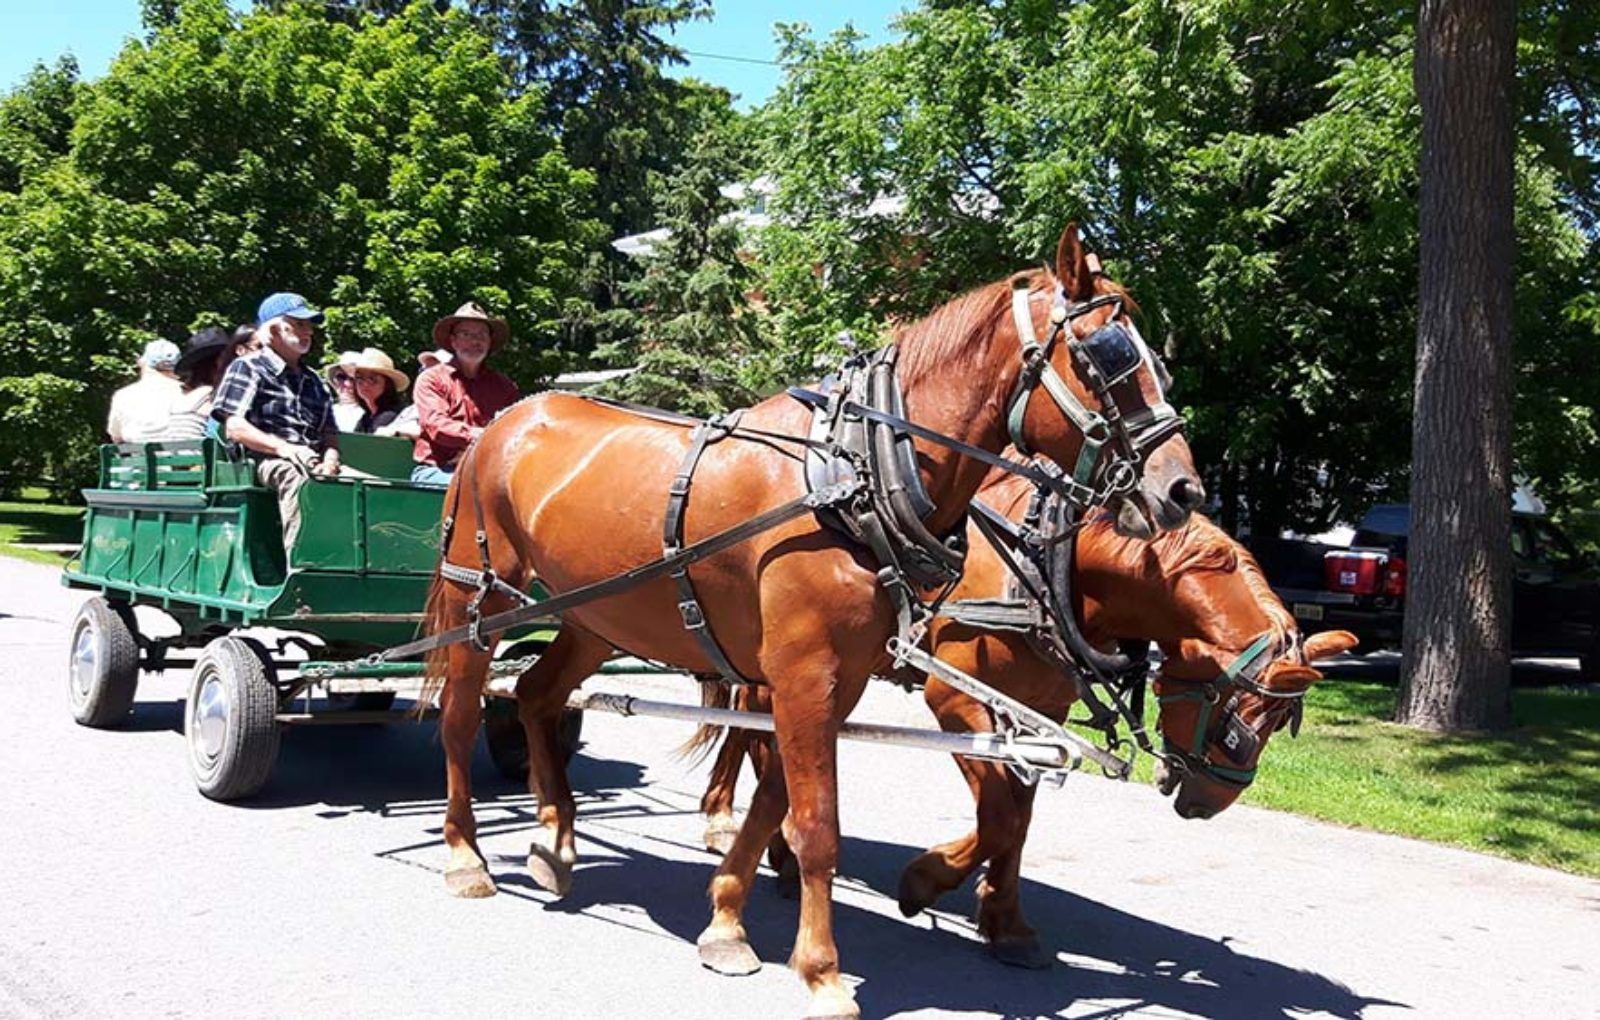 LS_July 10 2019 Horse and Buggy Parade (78)